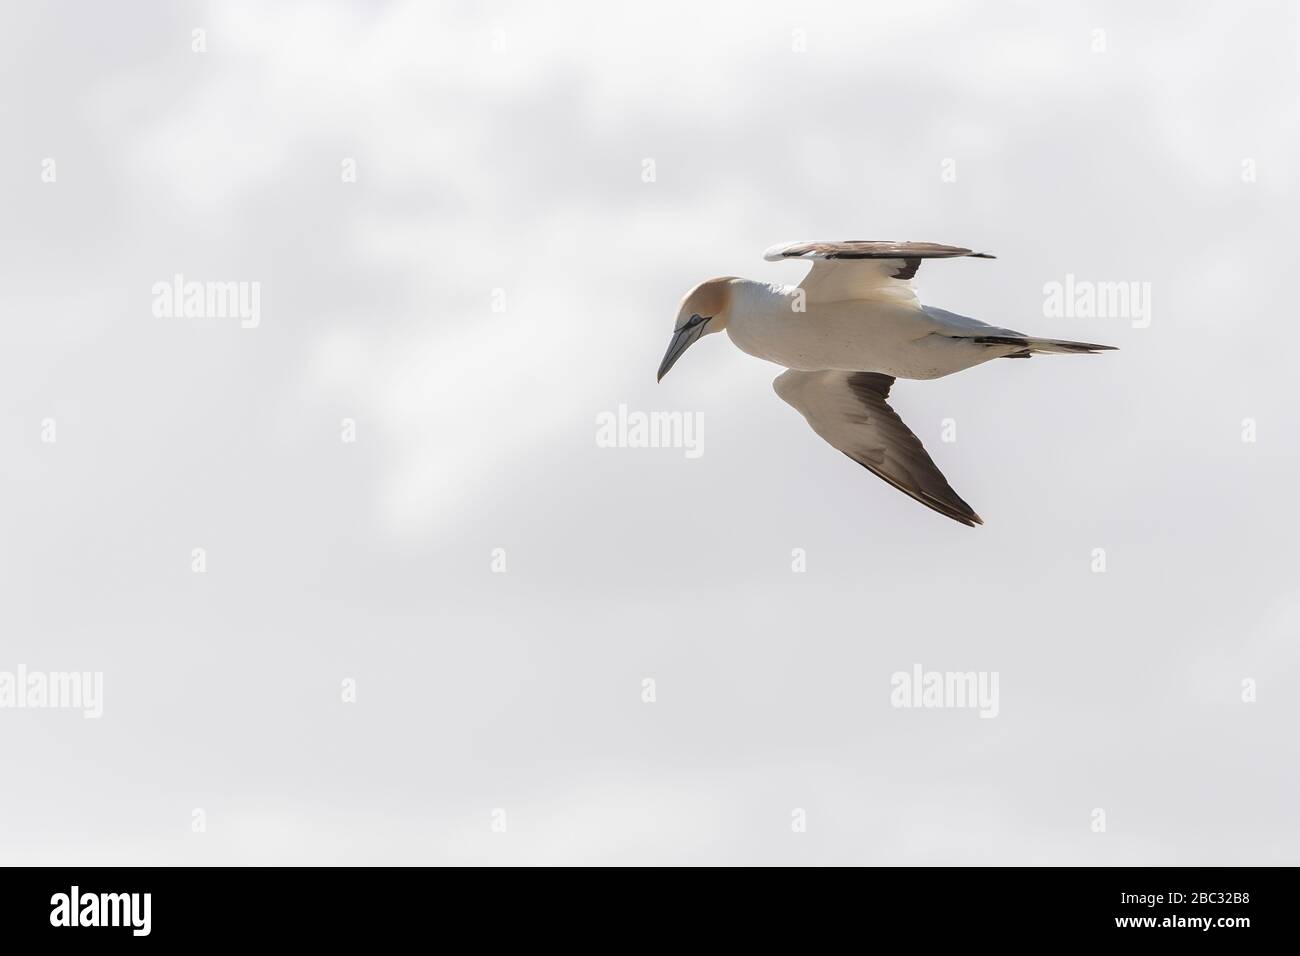 Australasian gannet in flight against white sky, ready to dive for fish, New Zealand Stock Photo